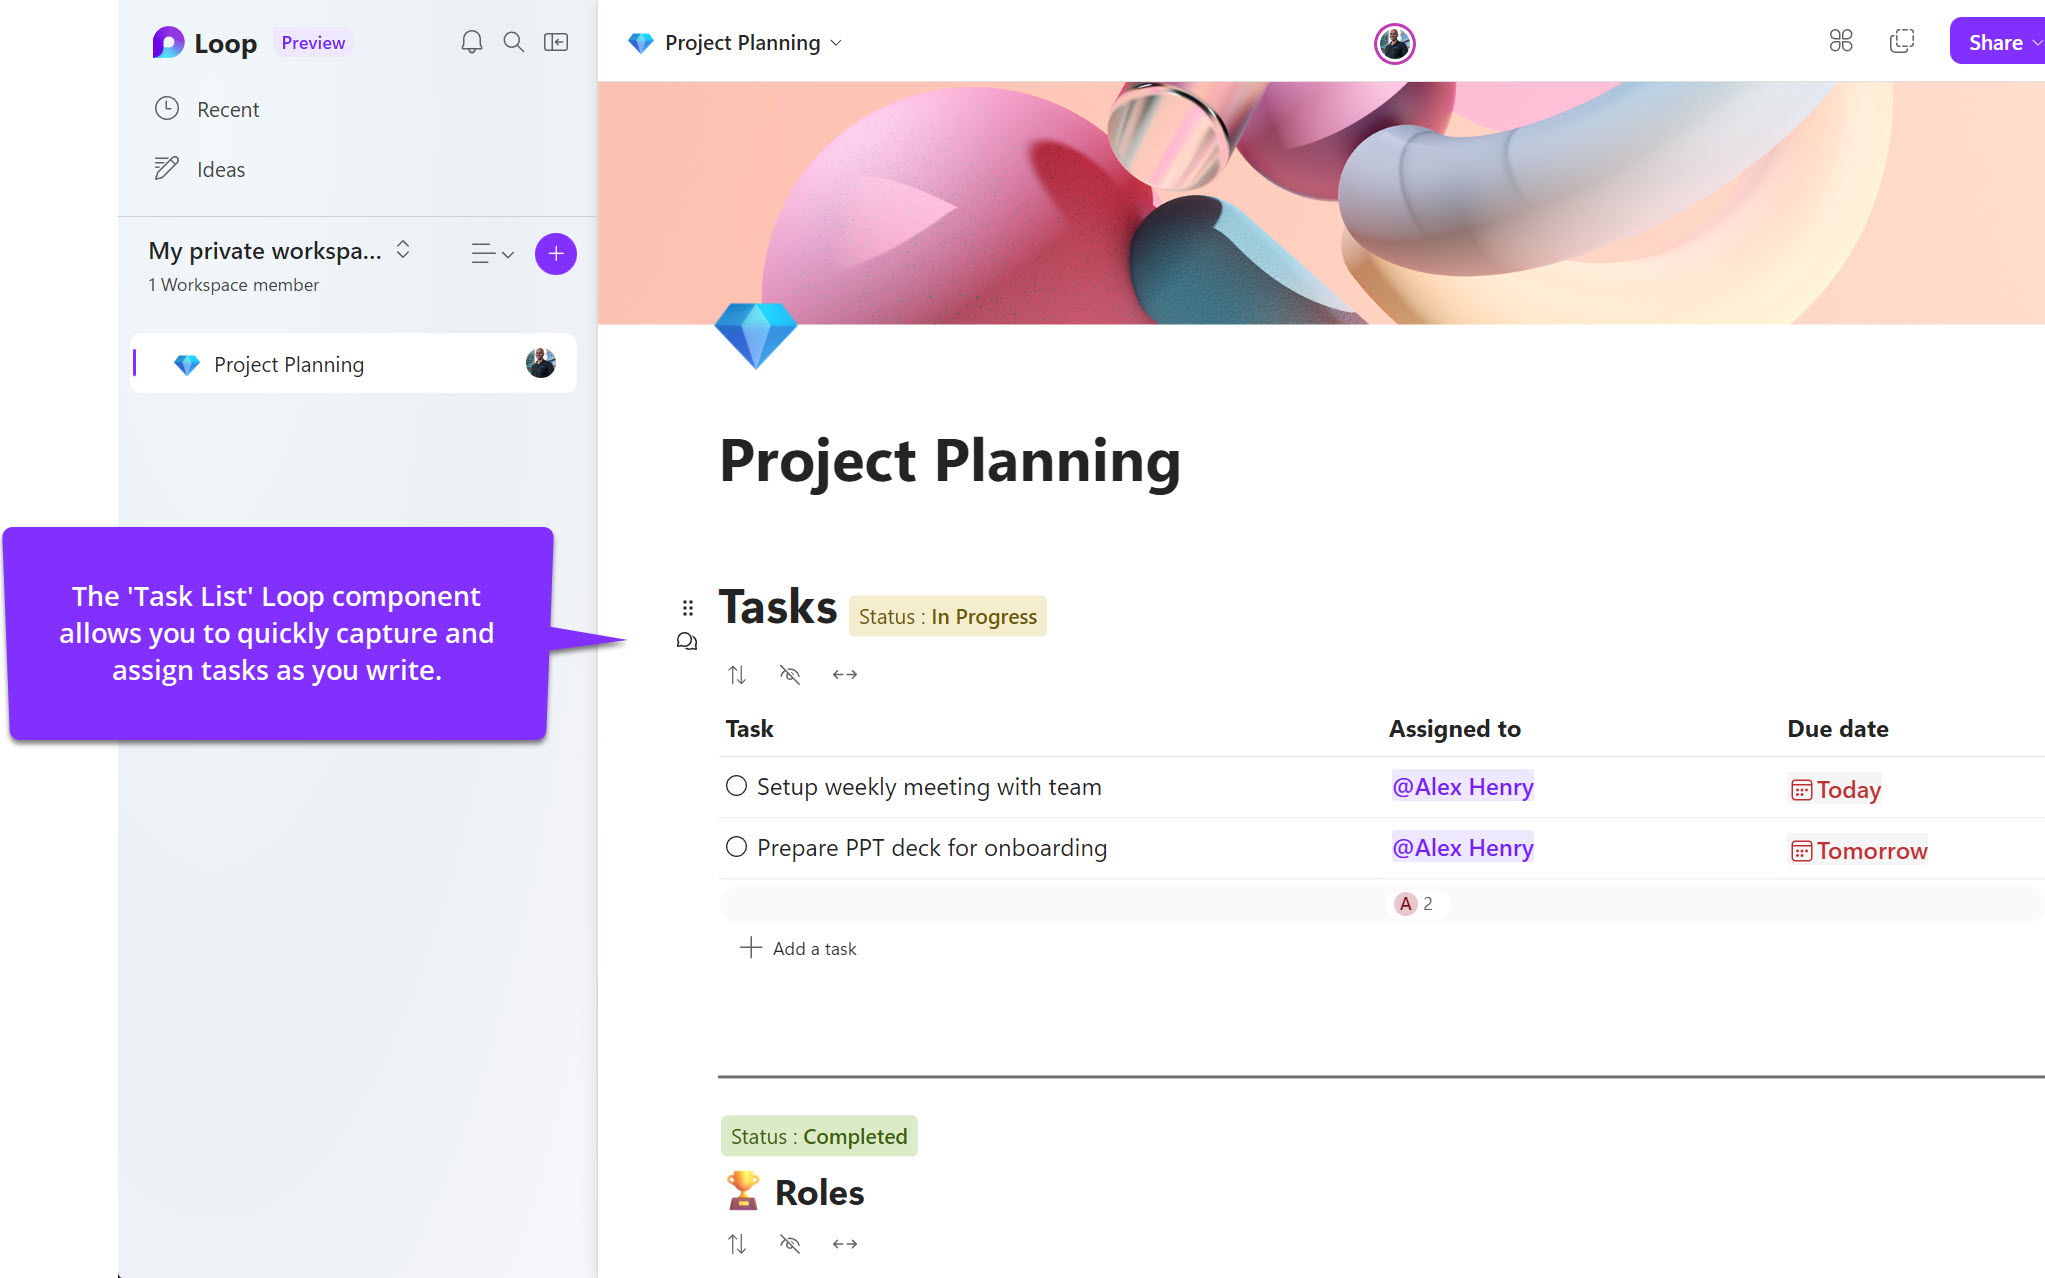 The "Task list" Loop component allows you to quickly capture and assign tasks as you write